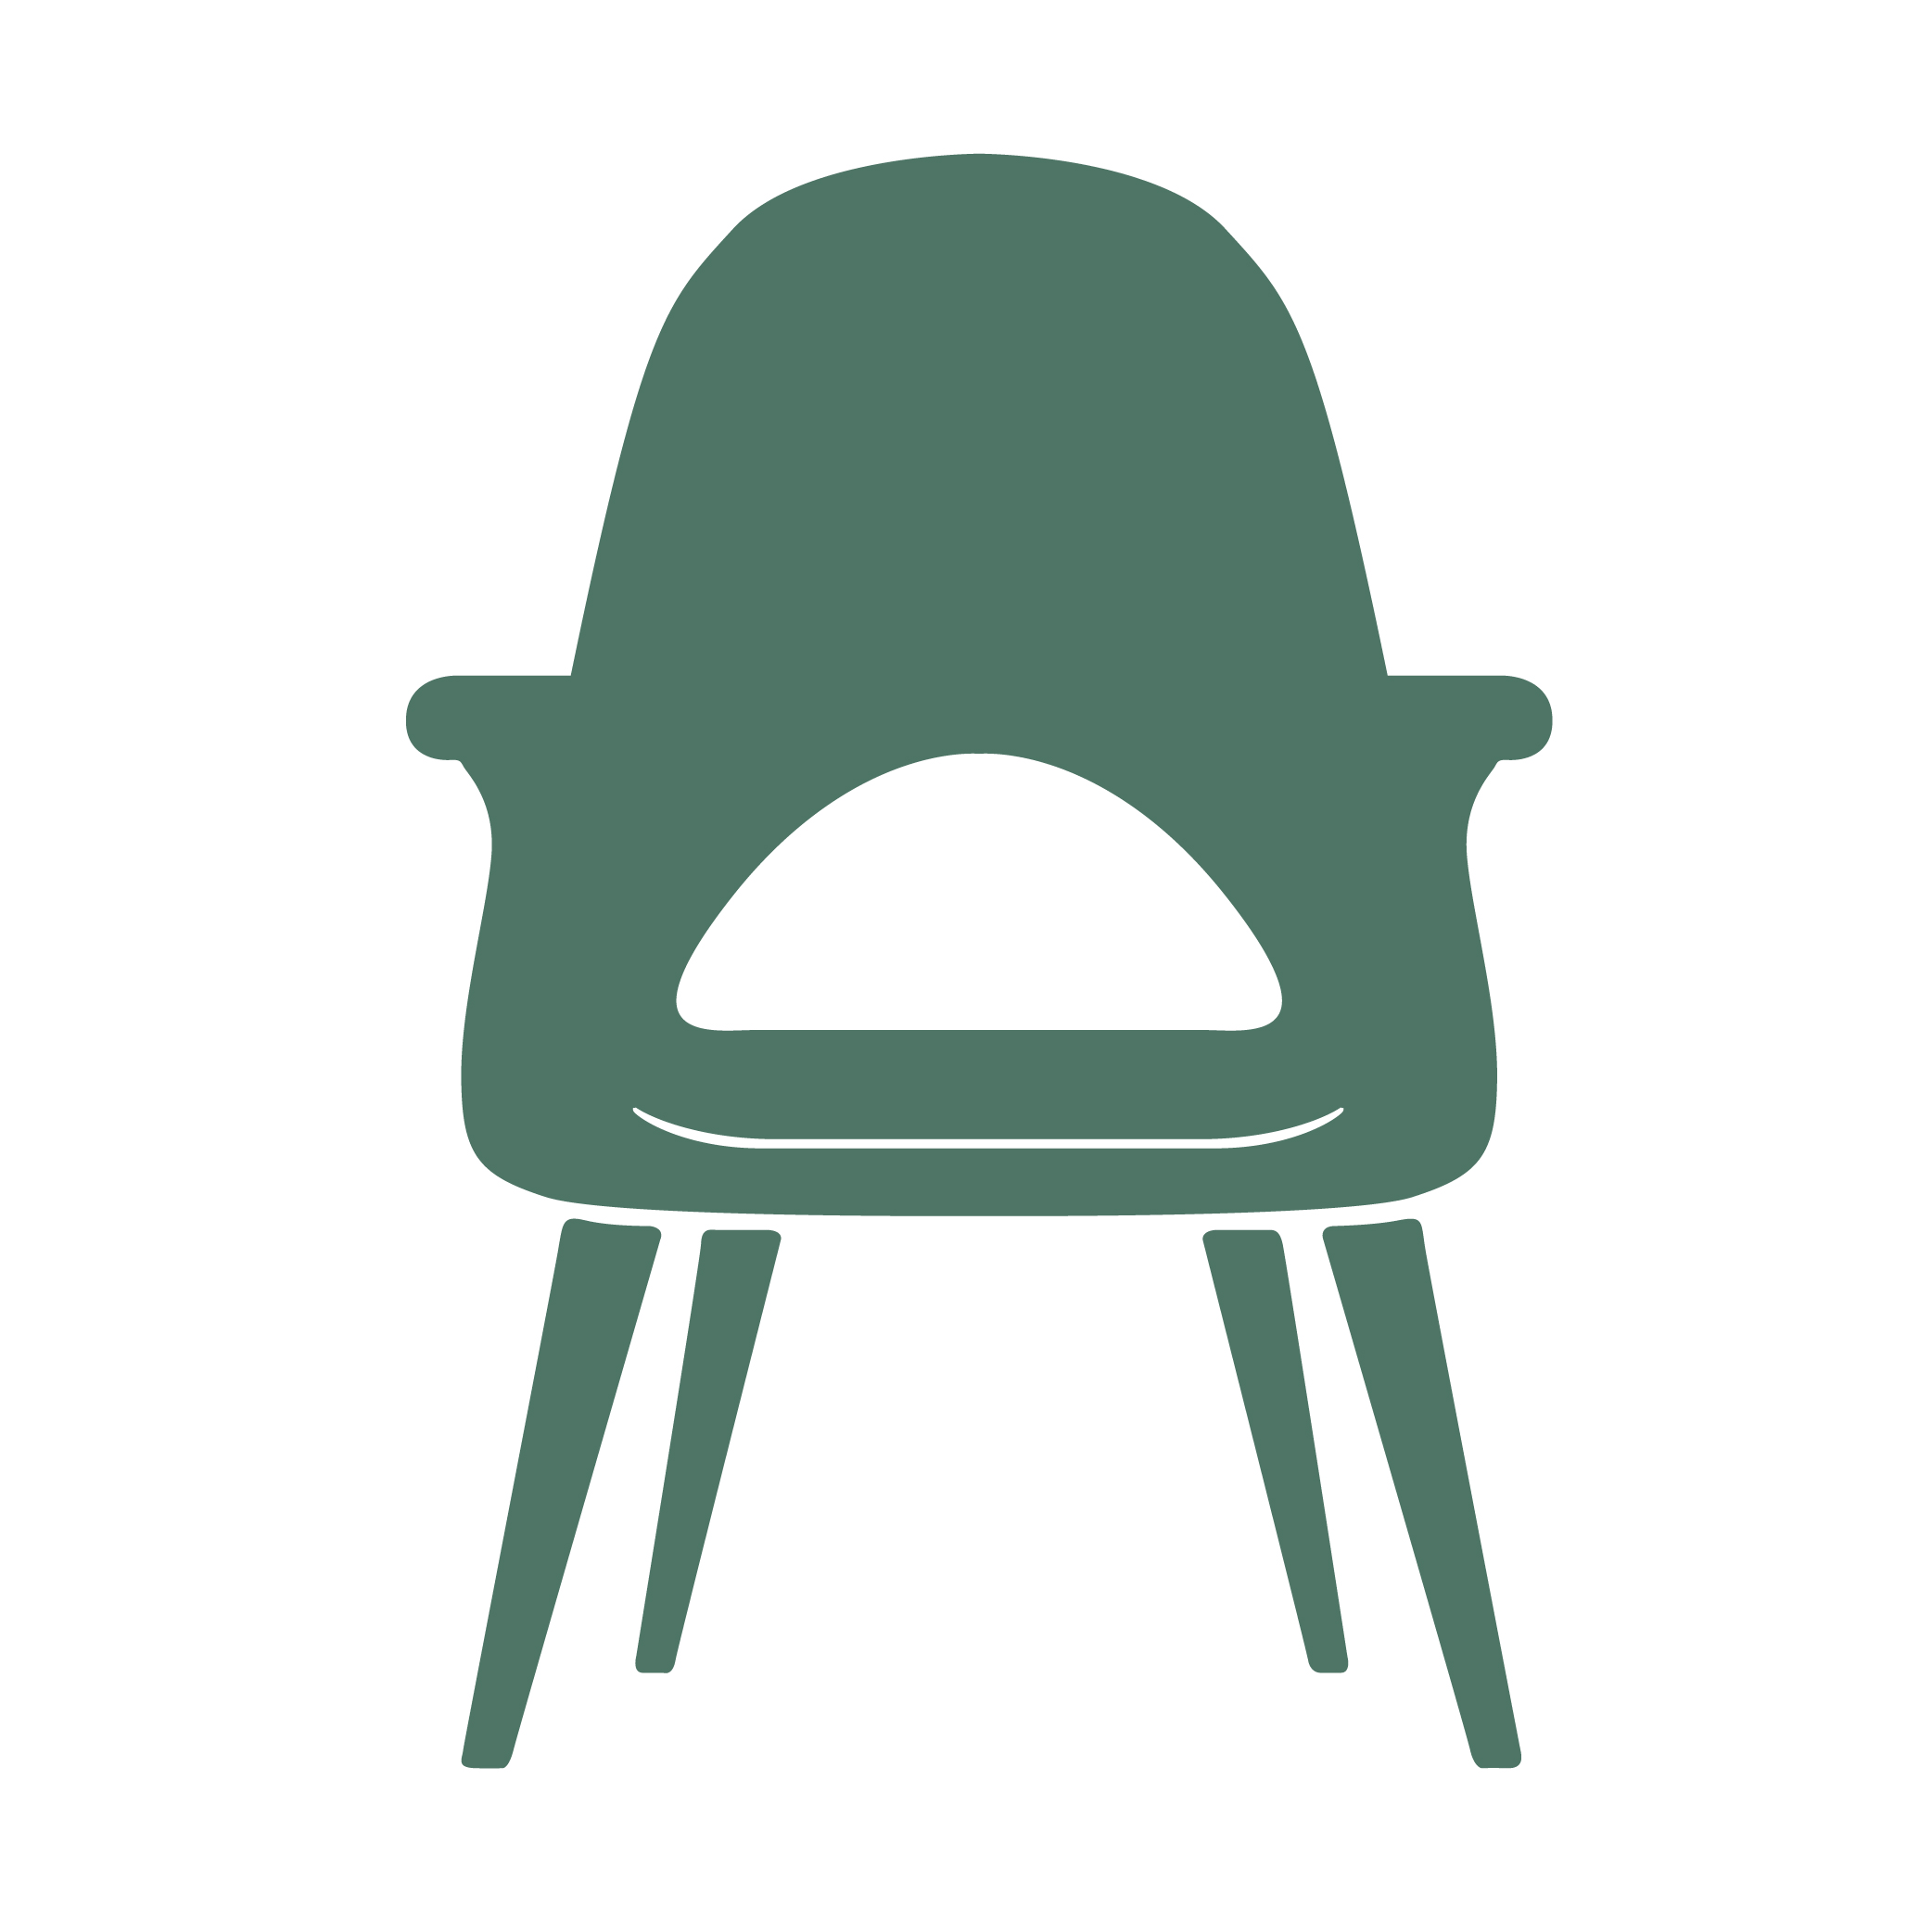 School House Solid Seat Stacking Side Chair